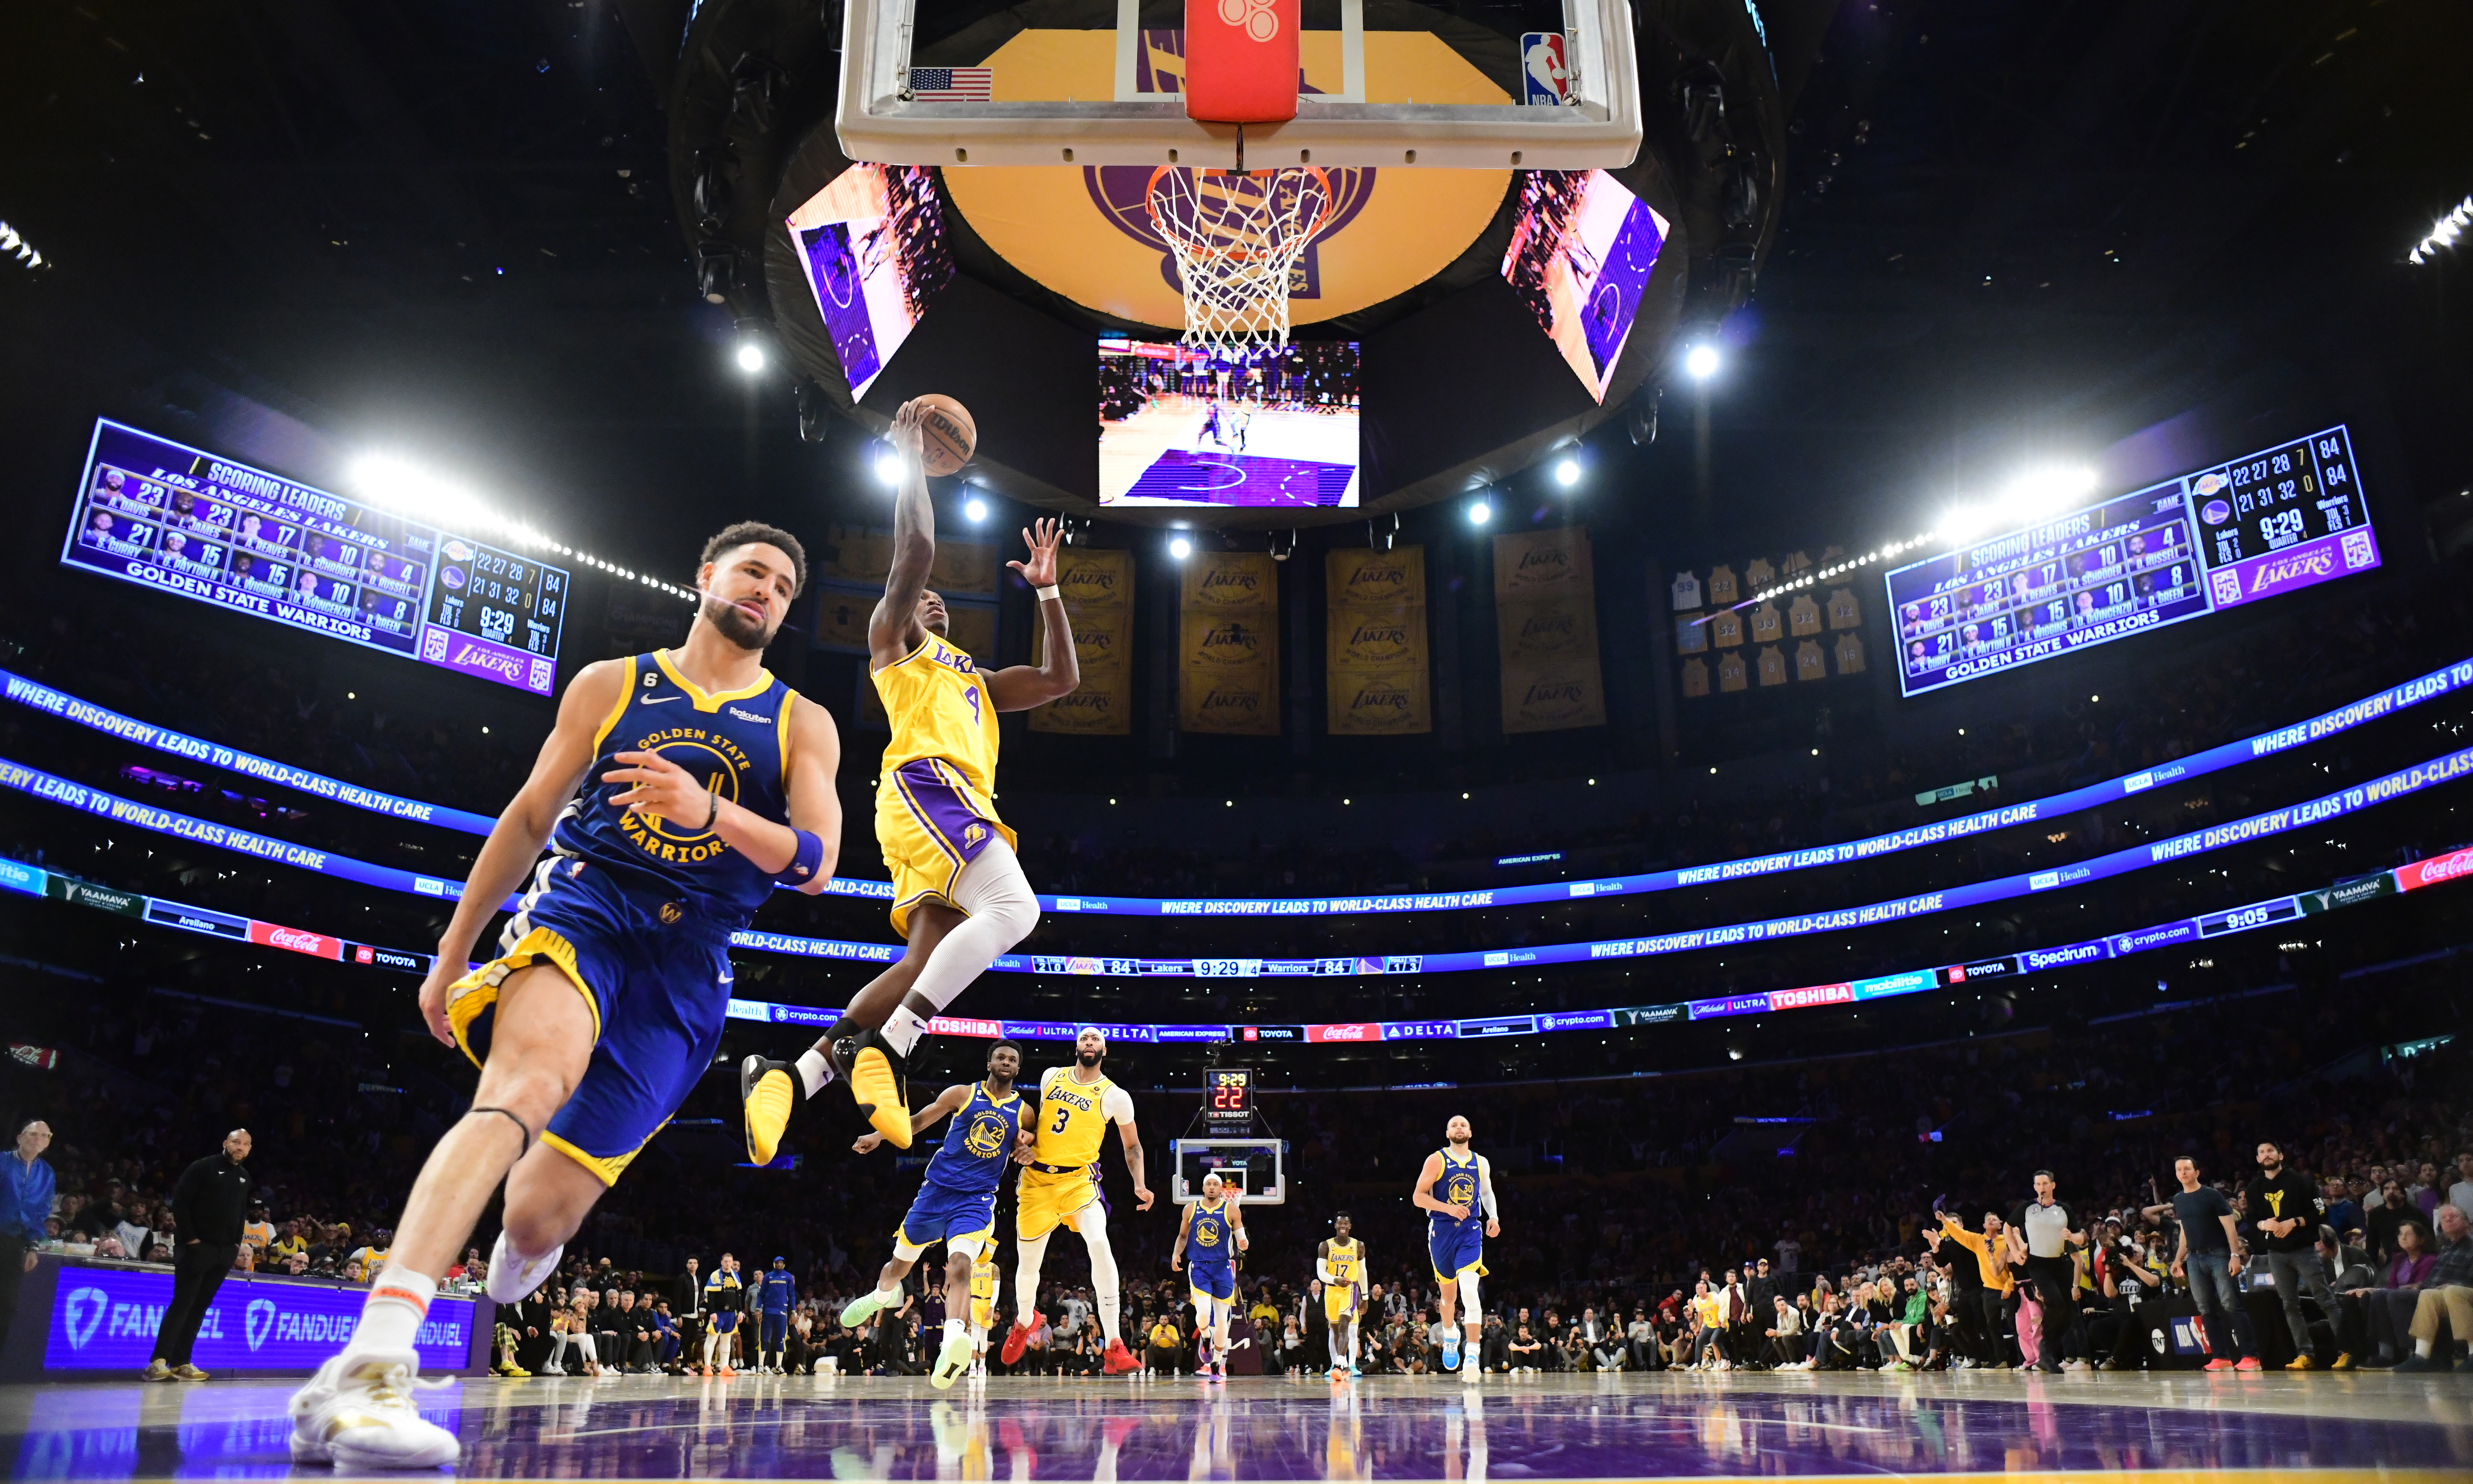 LOS ANGELES, CA - MAY 8: Lonnie Walker IV #4 of the Los Angeles Lakers drives to the basket during Game Four of the Western Conference Semi-Finals of the 2023 NBA Playoffs against the Golden State Warriors on May 8, 2023 at Crypto.com Arena in Los Angeles, California. NOTE TO USER: User expressly acknowledges and agrees that, by downloading and/or using this Photograph, user is consenting to the terms and conditions of the Getty Images License Agreement. Mandatory Copyright Notice: Copyright 2023 NBAE   Adam Pantozzi/NBAE via Getty Images/AFP (Photo by Adam Pantozzi / NBAE / Getty Images / Getty Images via AFP)